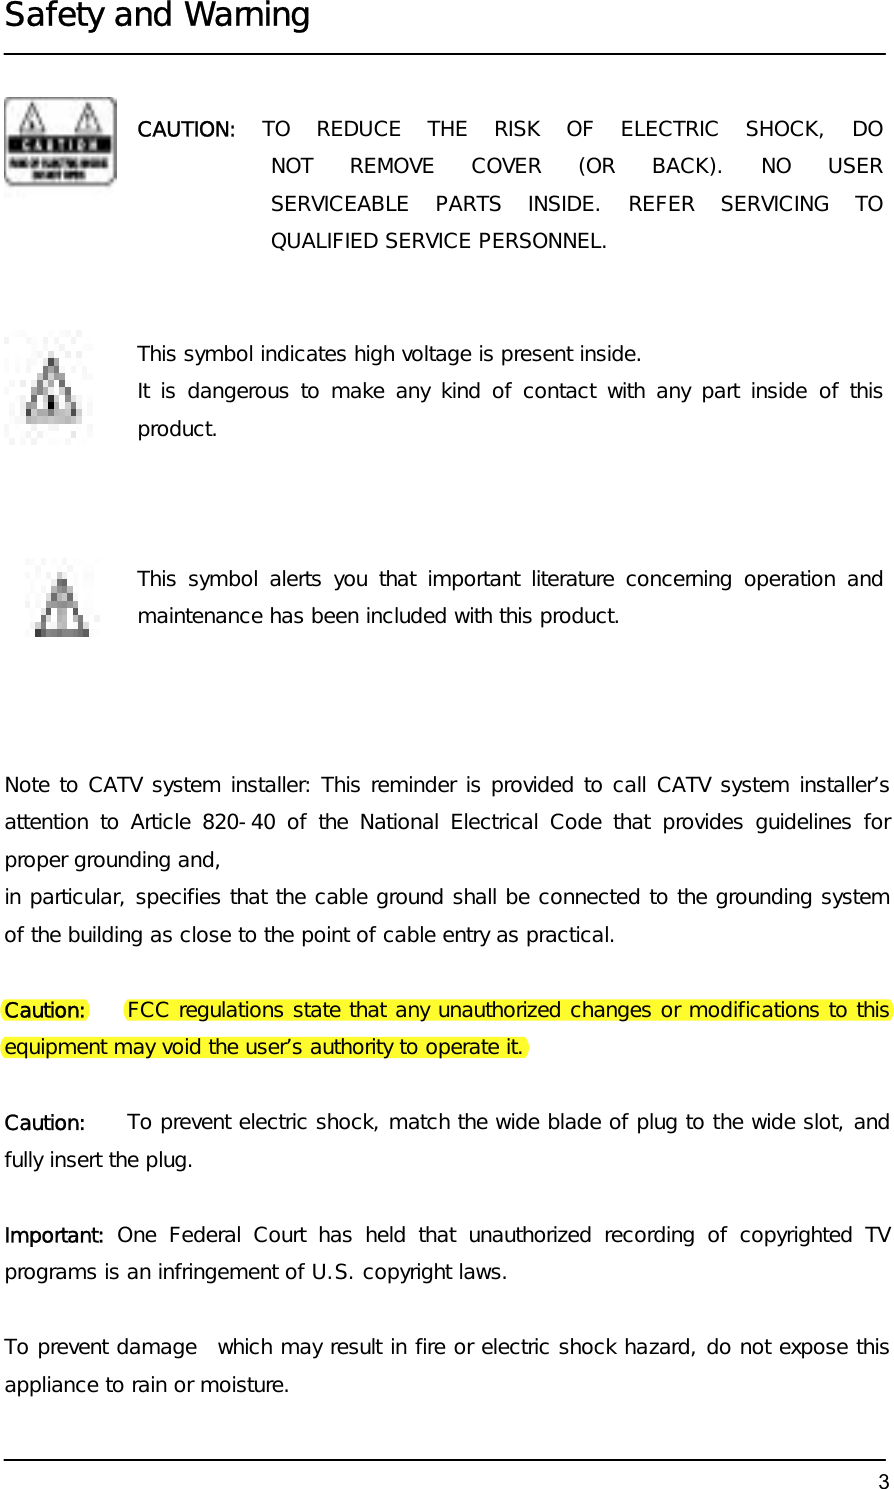  Safety and Warning  3            Note to CATV system installer: This reminder is provided to call CATV system installer’s attention to Article 820-40 of the National Electrical Code that provides guidelines for proper grounding and,  in particular, specifies that the cable ground shall be connected to the grounding system of the building as close to the point of cable entry as practical.  Caution:    FCC regulations state that any unauthorized changes or modifications to this equipment may void the user’s authority to operate it.  Caution:    To prevent electric shock, match the wide blade of plug to the wide slot, and fully insert the plug.  Important: One Federal Court has held that unauthorized recording of copyrighted TV programs is an infringement of U.S. copyright laws.  To prevent damage  which may result in fire or electric shock hazard, do not expose this appliance to rain or moisture. CAUTION:  TO REDUCE THE RISK OF ELECTRIC SHOCK, DO NOT REMOVE COVER (OR BACK). NO USER SERVICEABLE PARTS INSIDE. REFER SERVICING TO QUALIFIED SERVICE PERSONNEL. This symbol indicates high voltage is present inside.  It is dangerous to make any kind of contact with any part inside of this product. This symbol alerts you that important literature concerning operation and maintenance has been included with this product. 